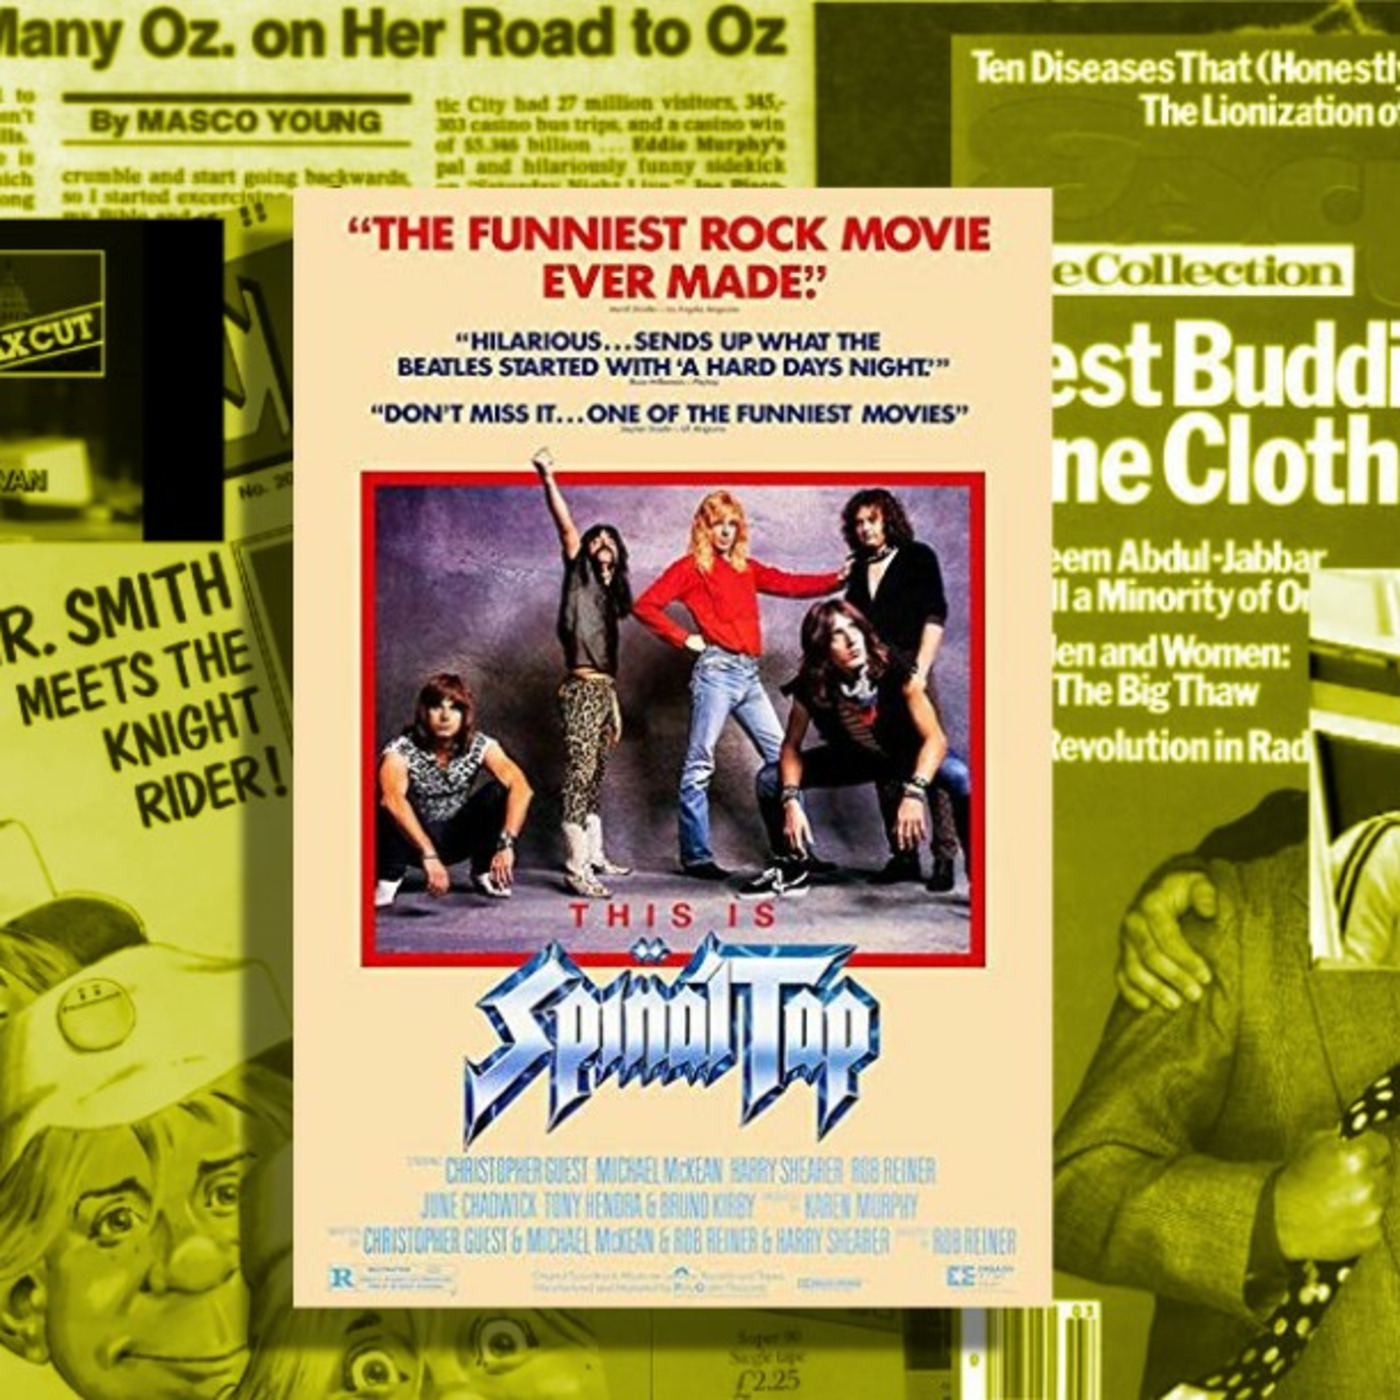 Episode 23: This is Spinal Tap (1984)